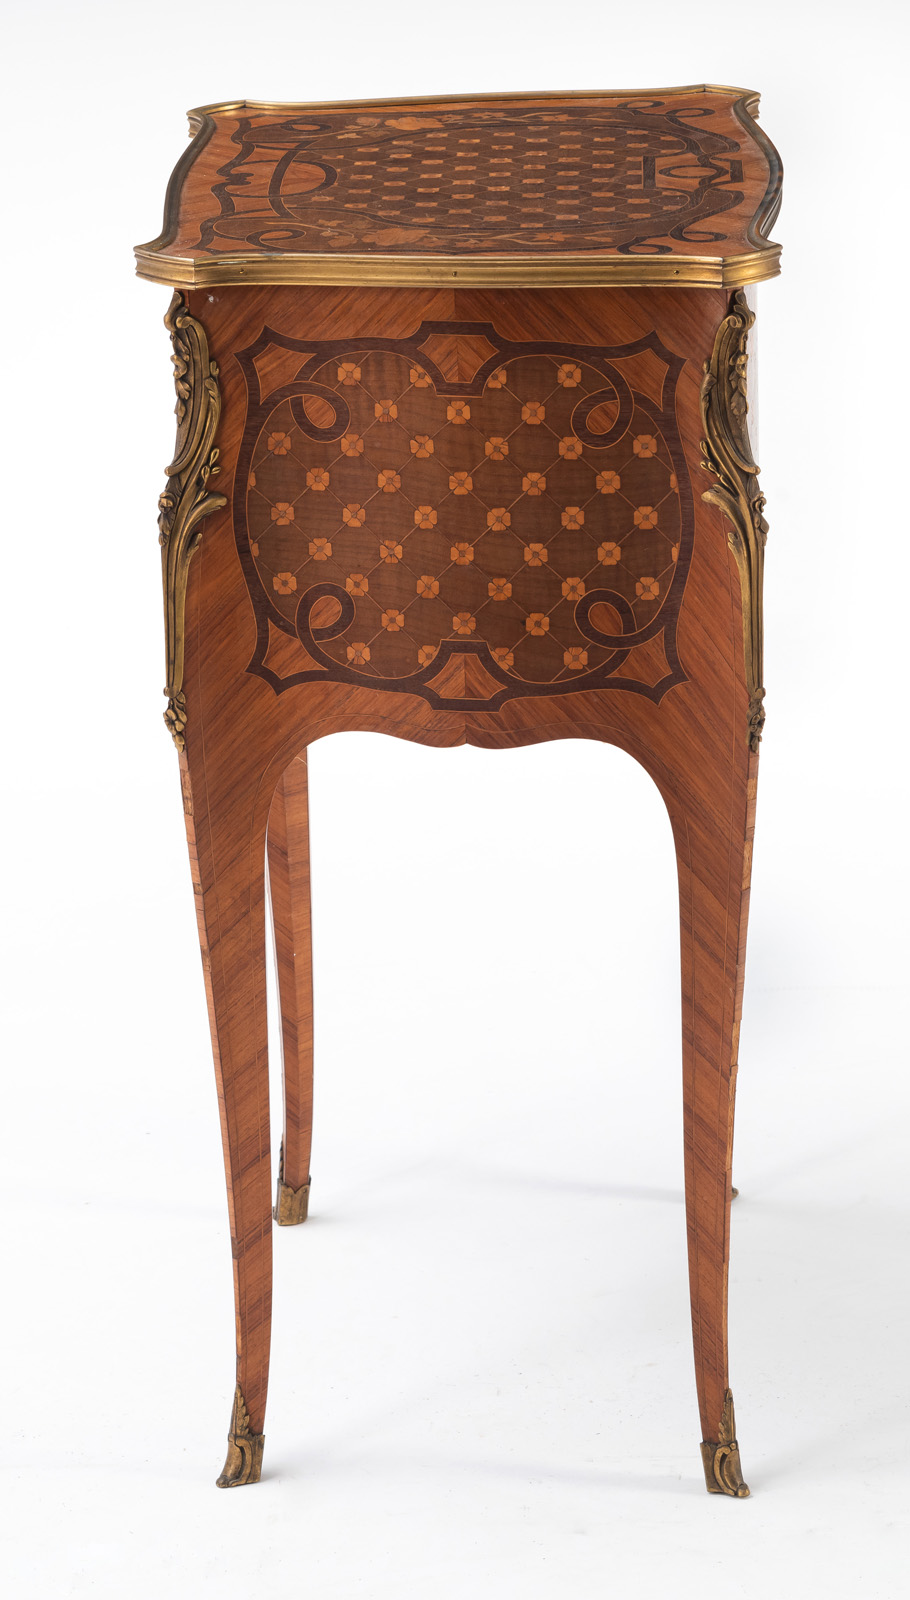 A LOUIS VI STYLE BRONZE MOUNTED PARTIAL EBONIZED KINGWOOD MARQUETRIED OCCASIONAL COMMODE - Image 4 of 7